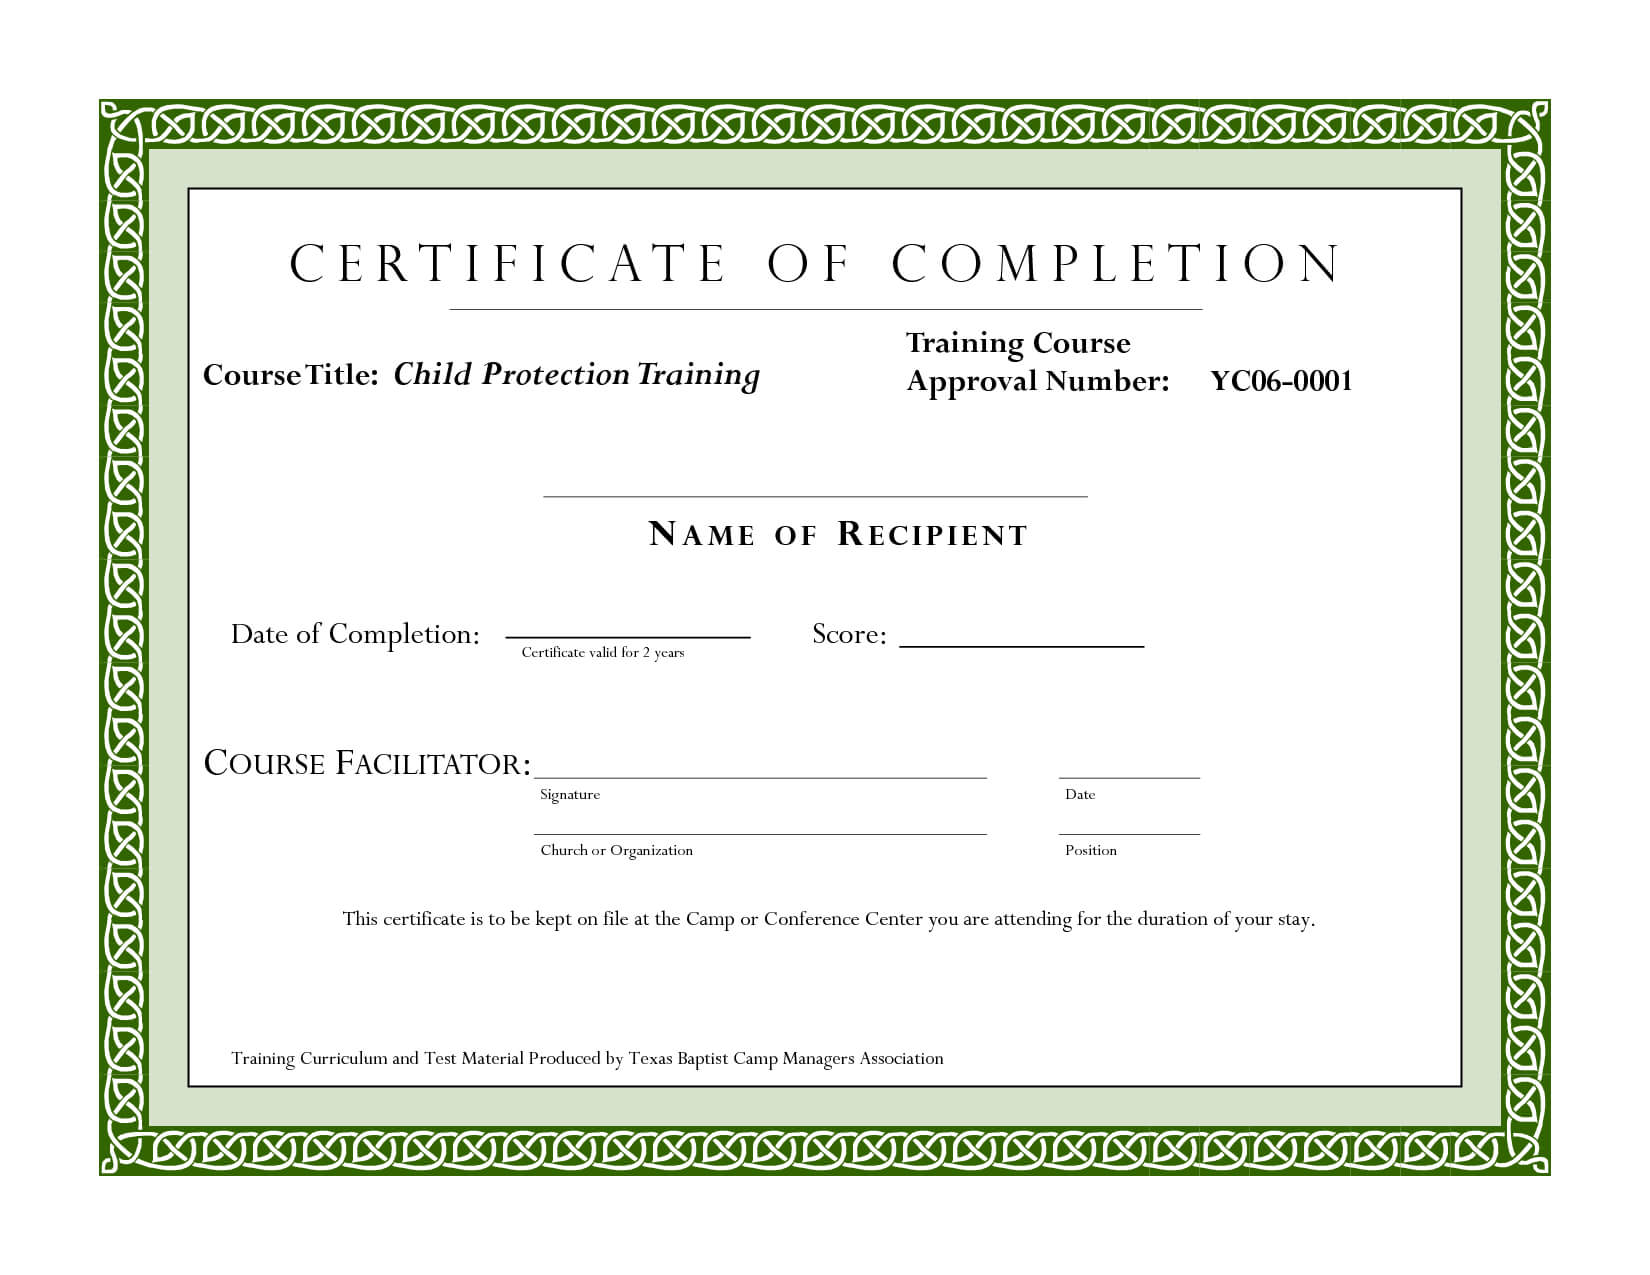 Course Completion Certificate Template | Certificate Of Pertaining To Share Certificate Template Australia